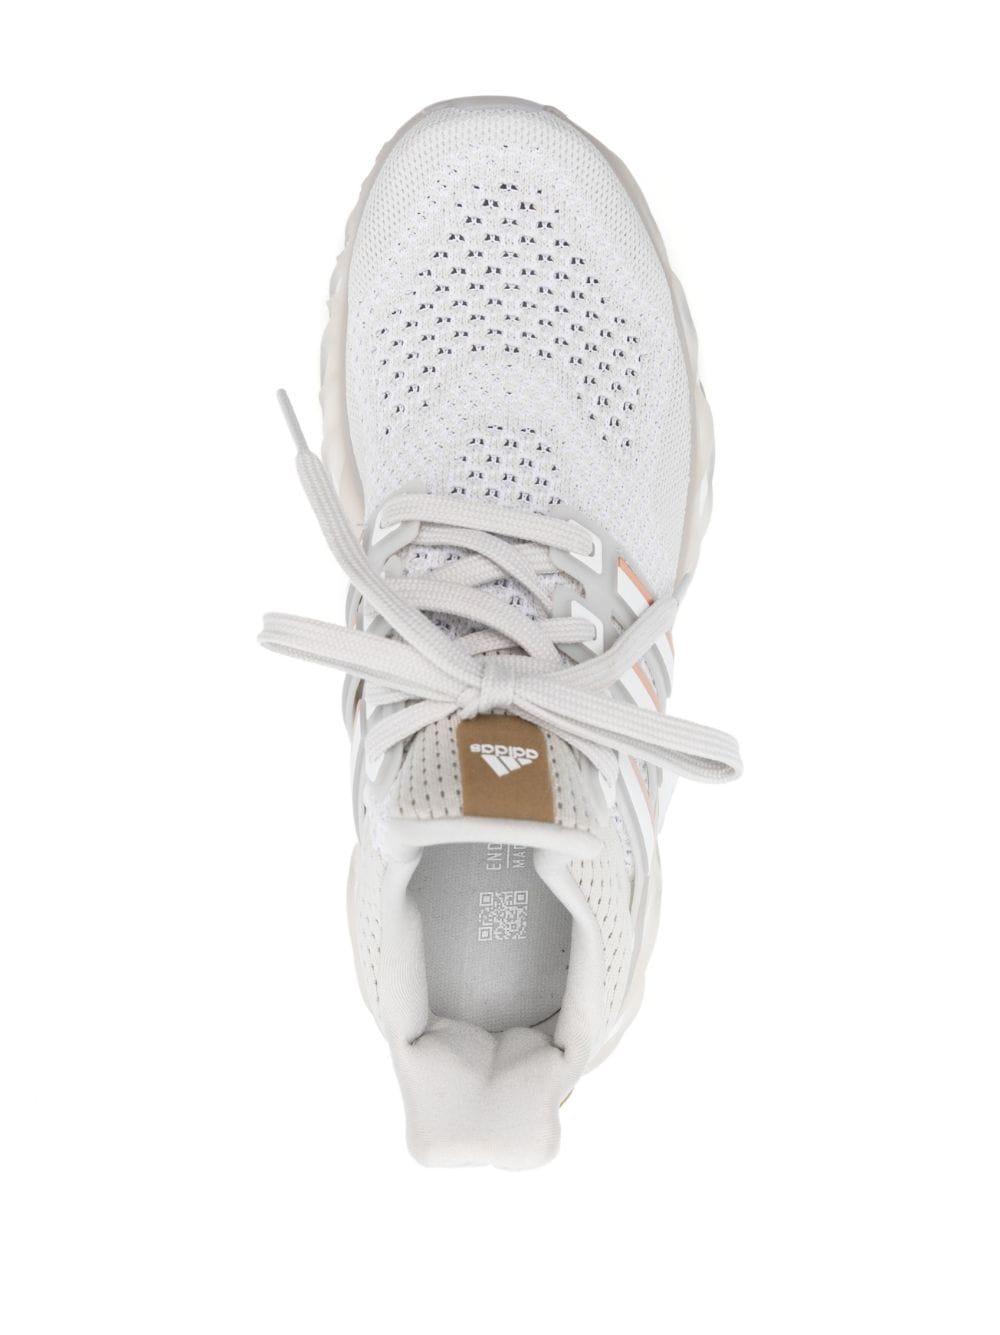 adidas Ultraboost Web Dna Low-top Sneakers in White | Lyst